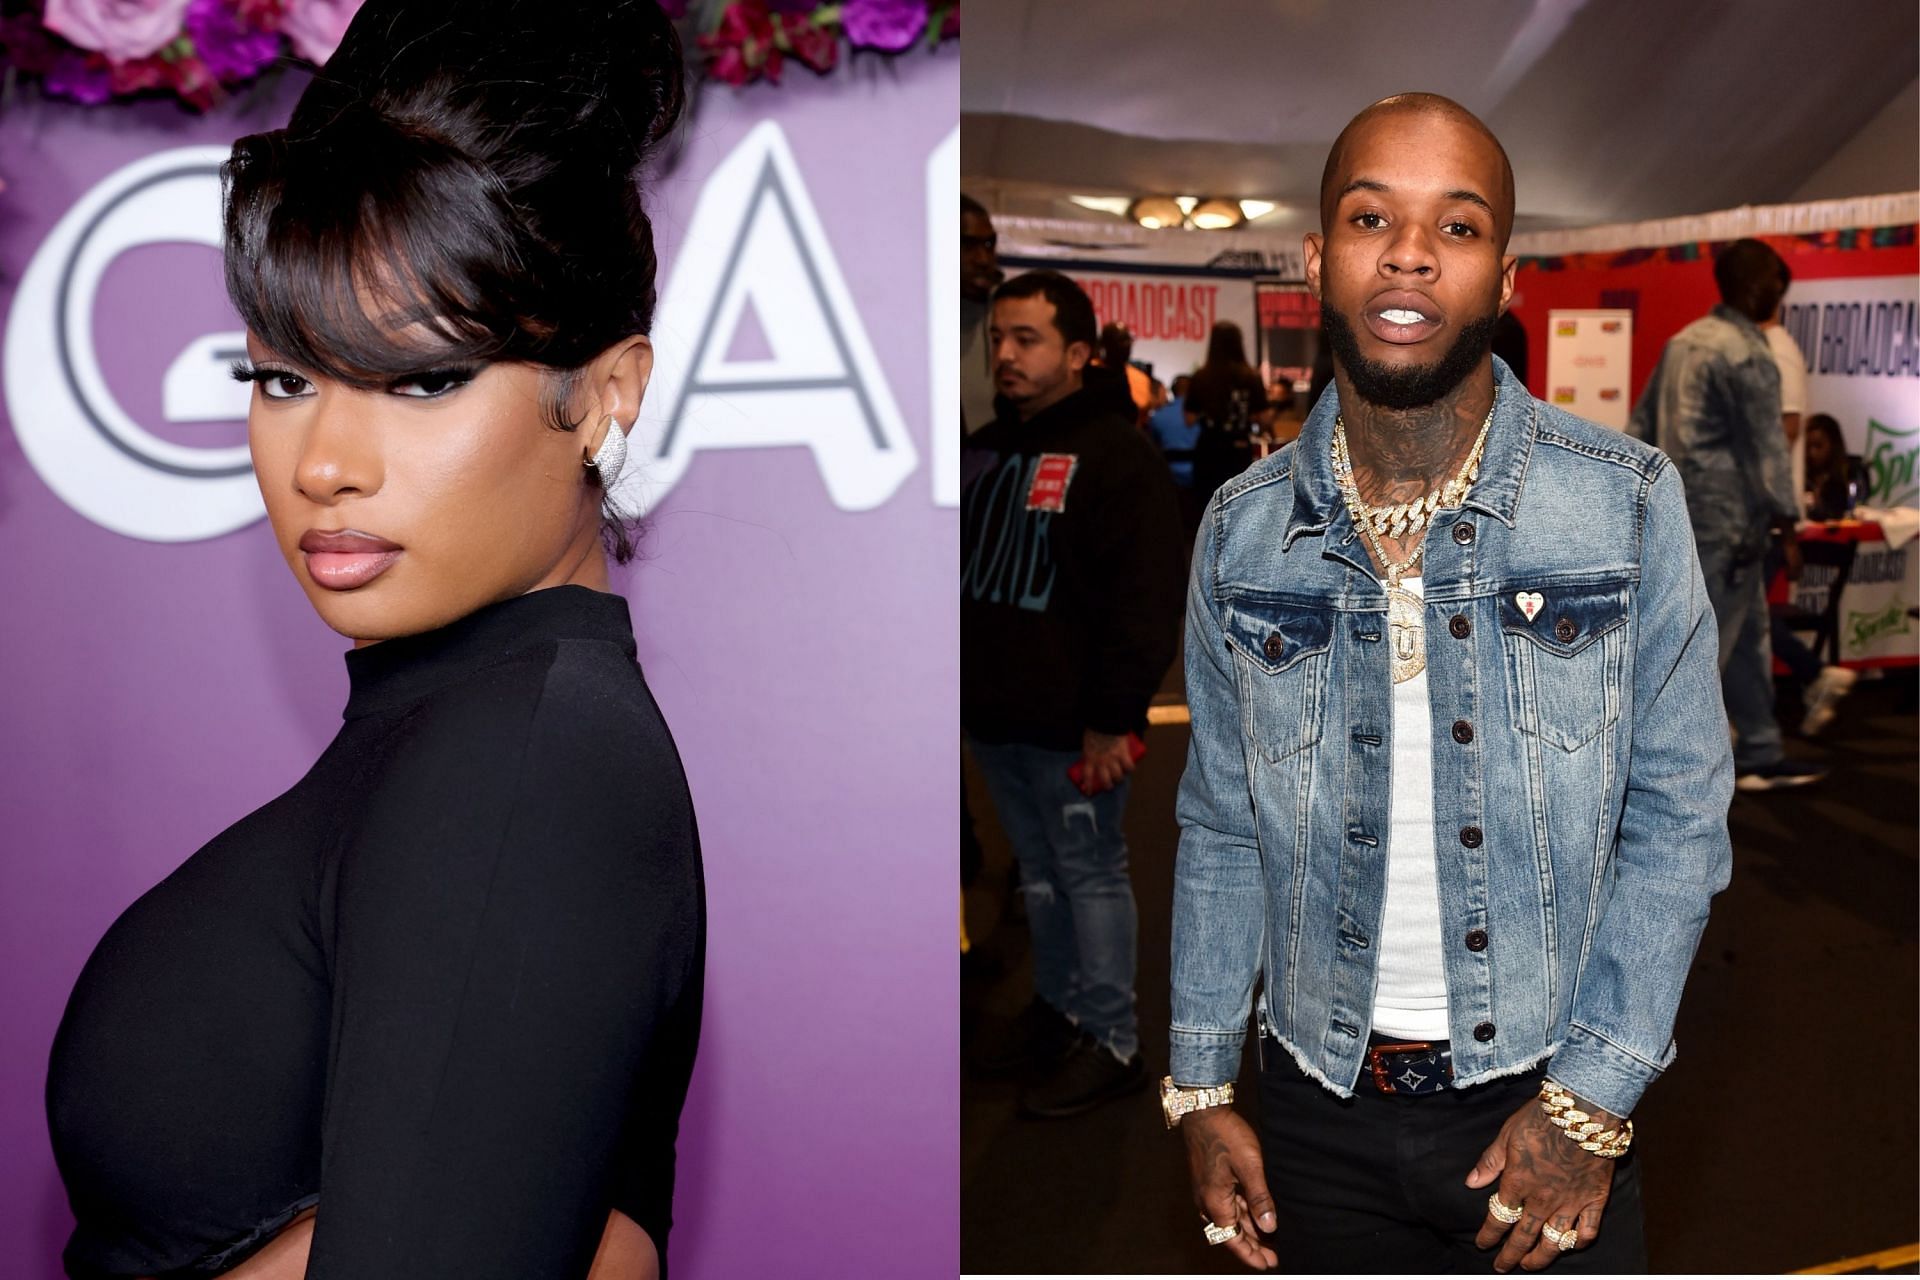 No DNA of Tory Lanez found on gun magazine in Megan Thee Stallion shooting (Images via Getty Images)